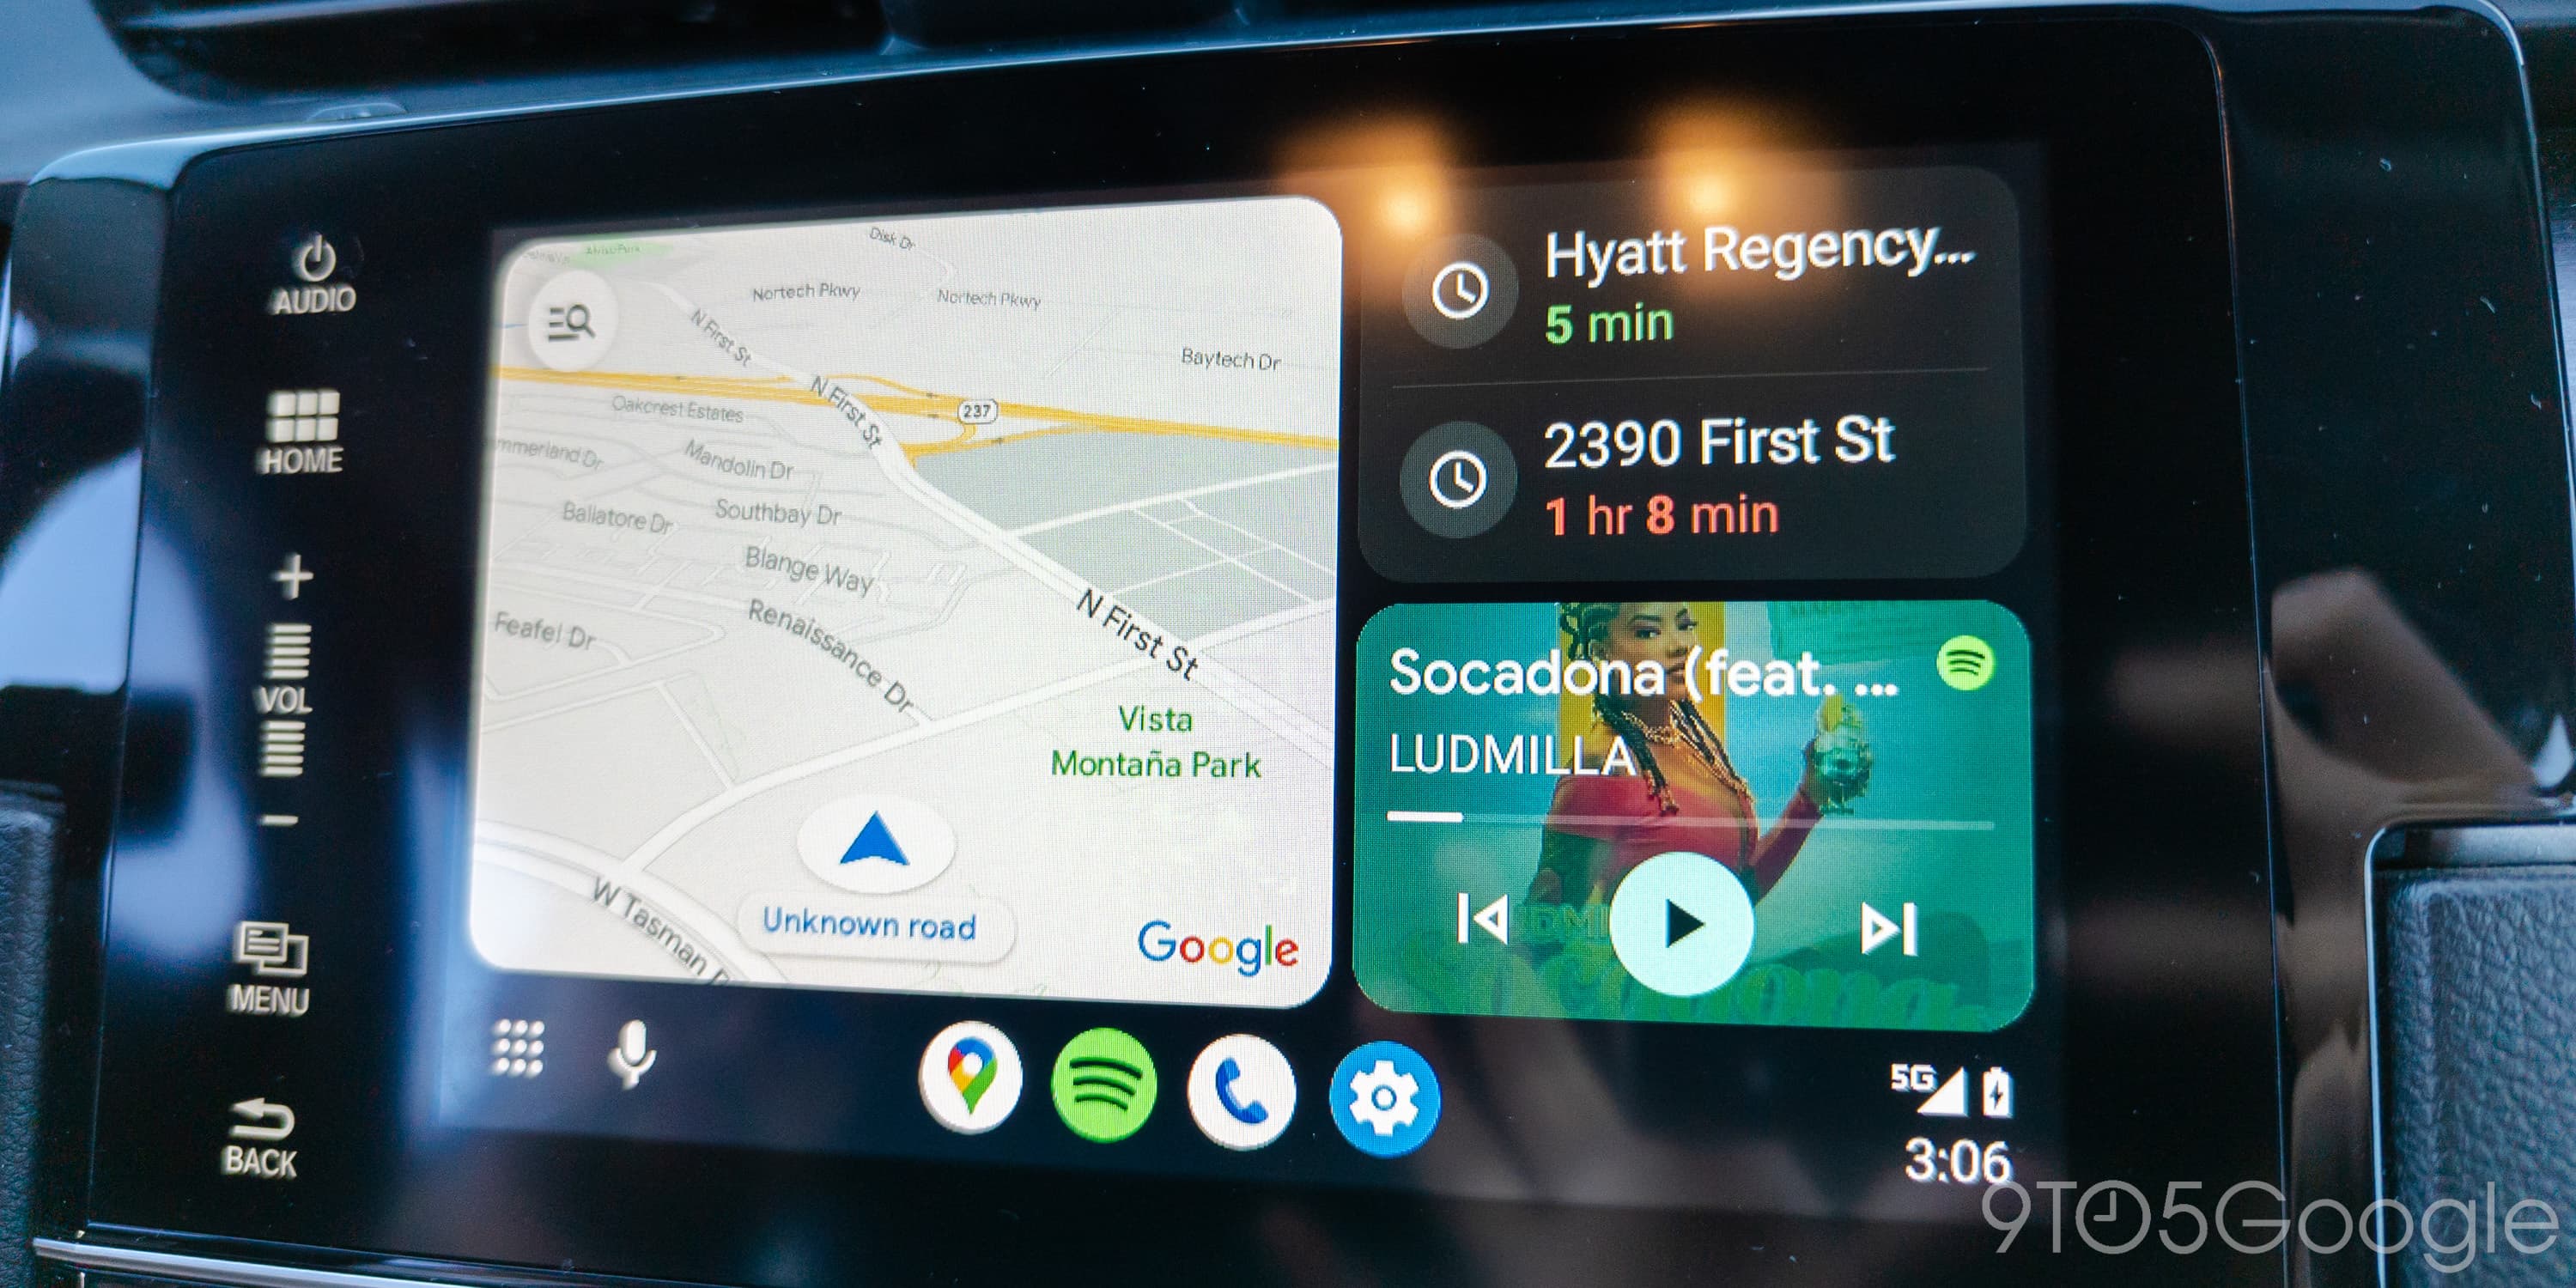 Android Auto redesign adds split-screen mode to all displays - 9to5Google